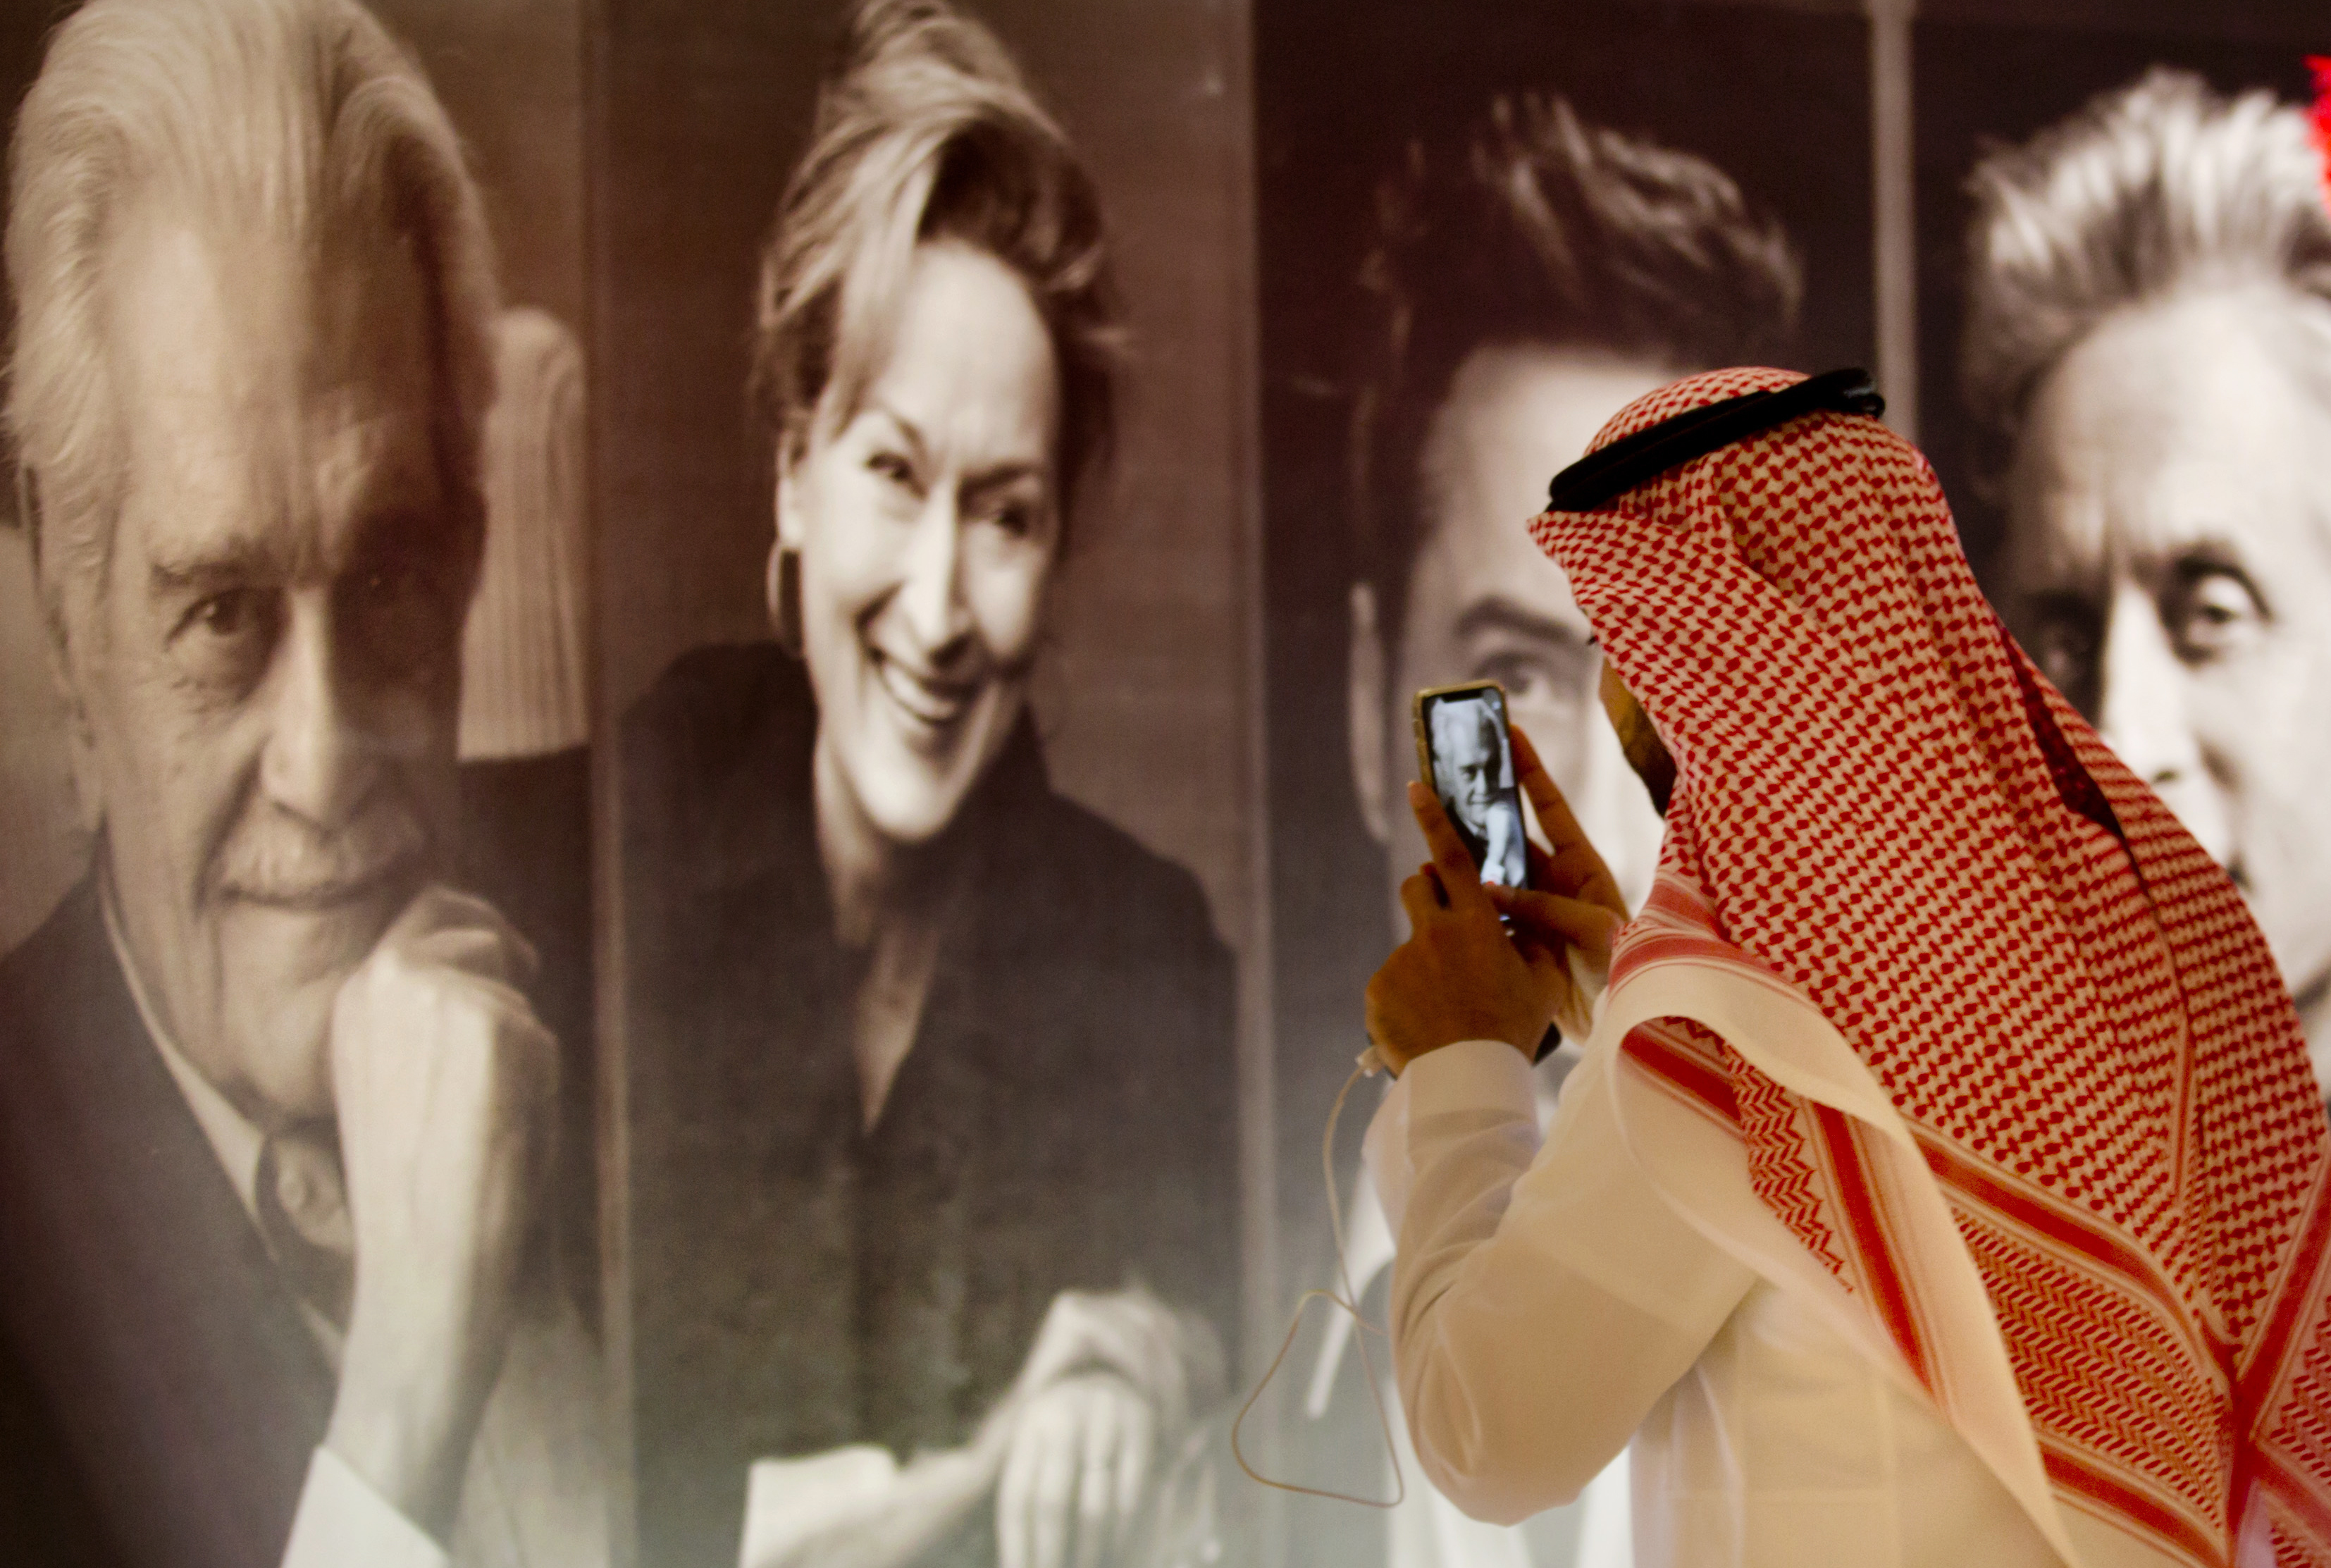 A visitor takes pictures of posters of Hollywood movie stars during an invitation-only screening at the King Abdullah Financial District Theater, in Riyadh, Saudi Arabia, Wednesday, April 18, 2018. Saudi Arabia held a private screening of the Hollywood blockbuster 